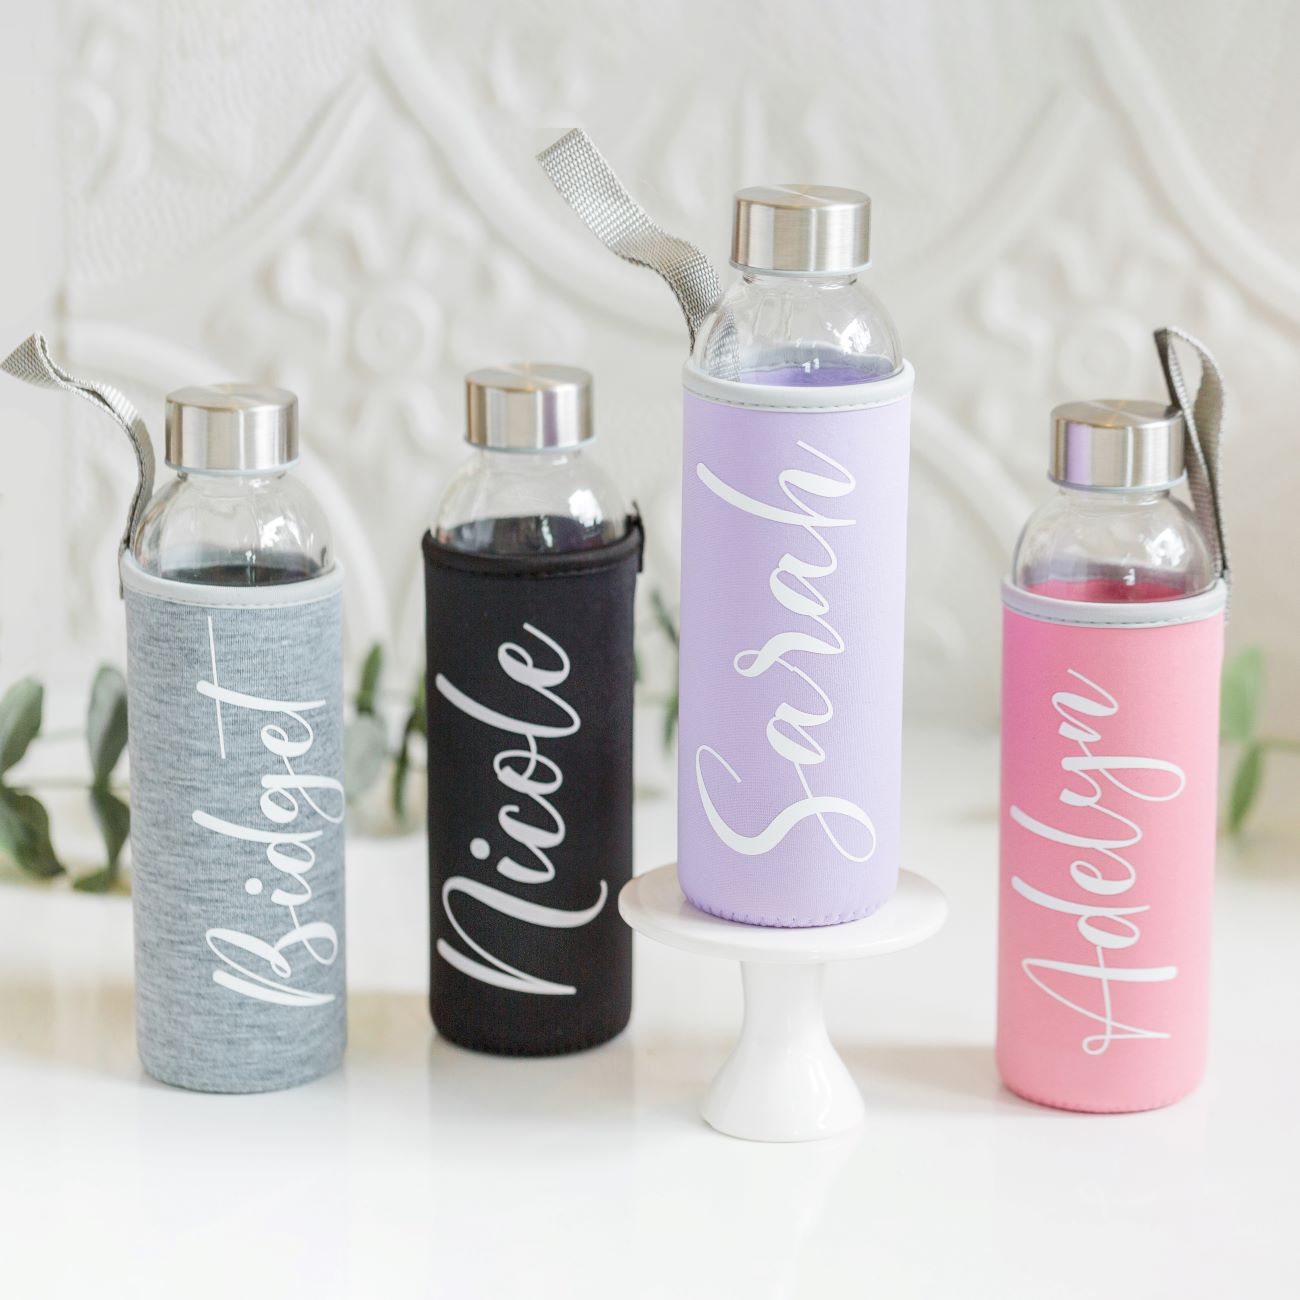 White Base Steel Personalized Photo Printed Water Bottle Gift, Size: 7 X 20  (wxh) cm at Rs 600/piece in Coimbatore